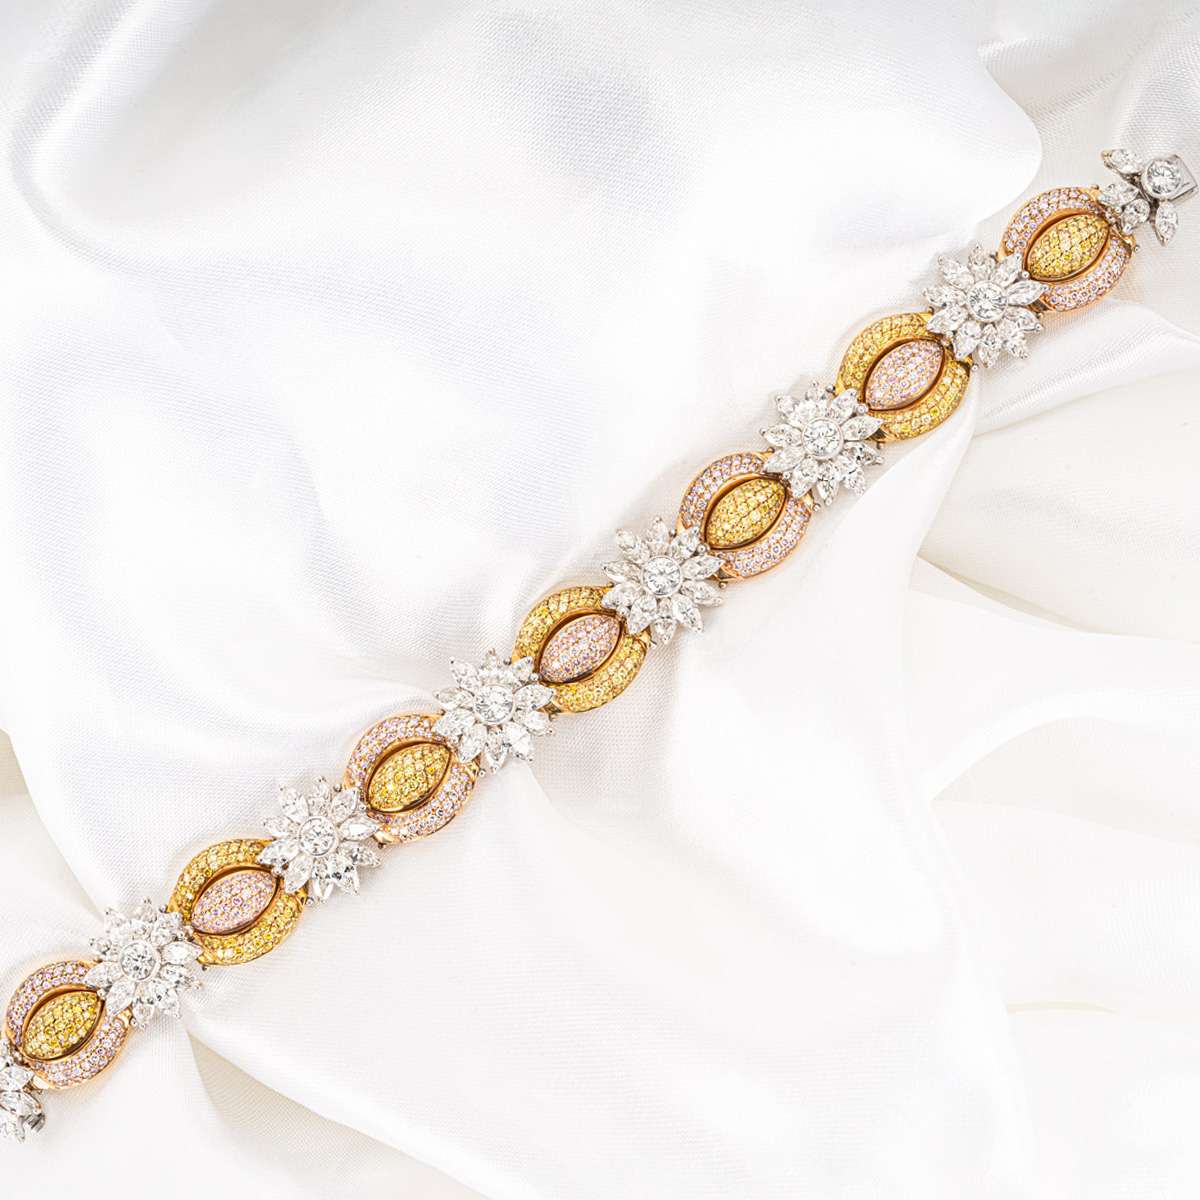 White Gold Fancy Yellow, Natural Pink and White Diamond Bracelet